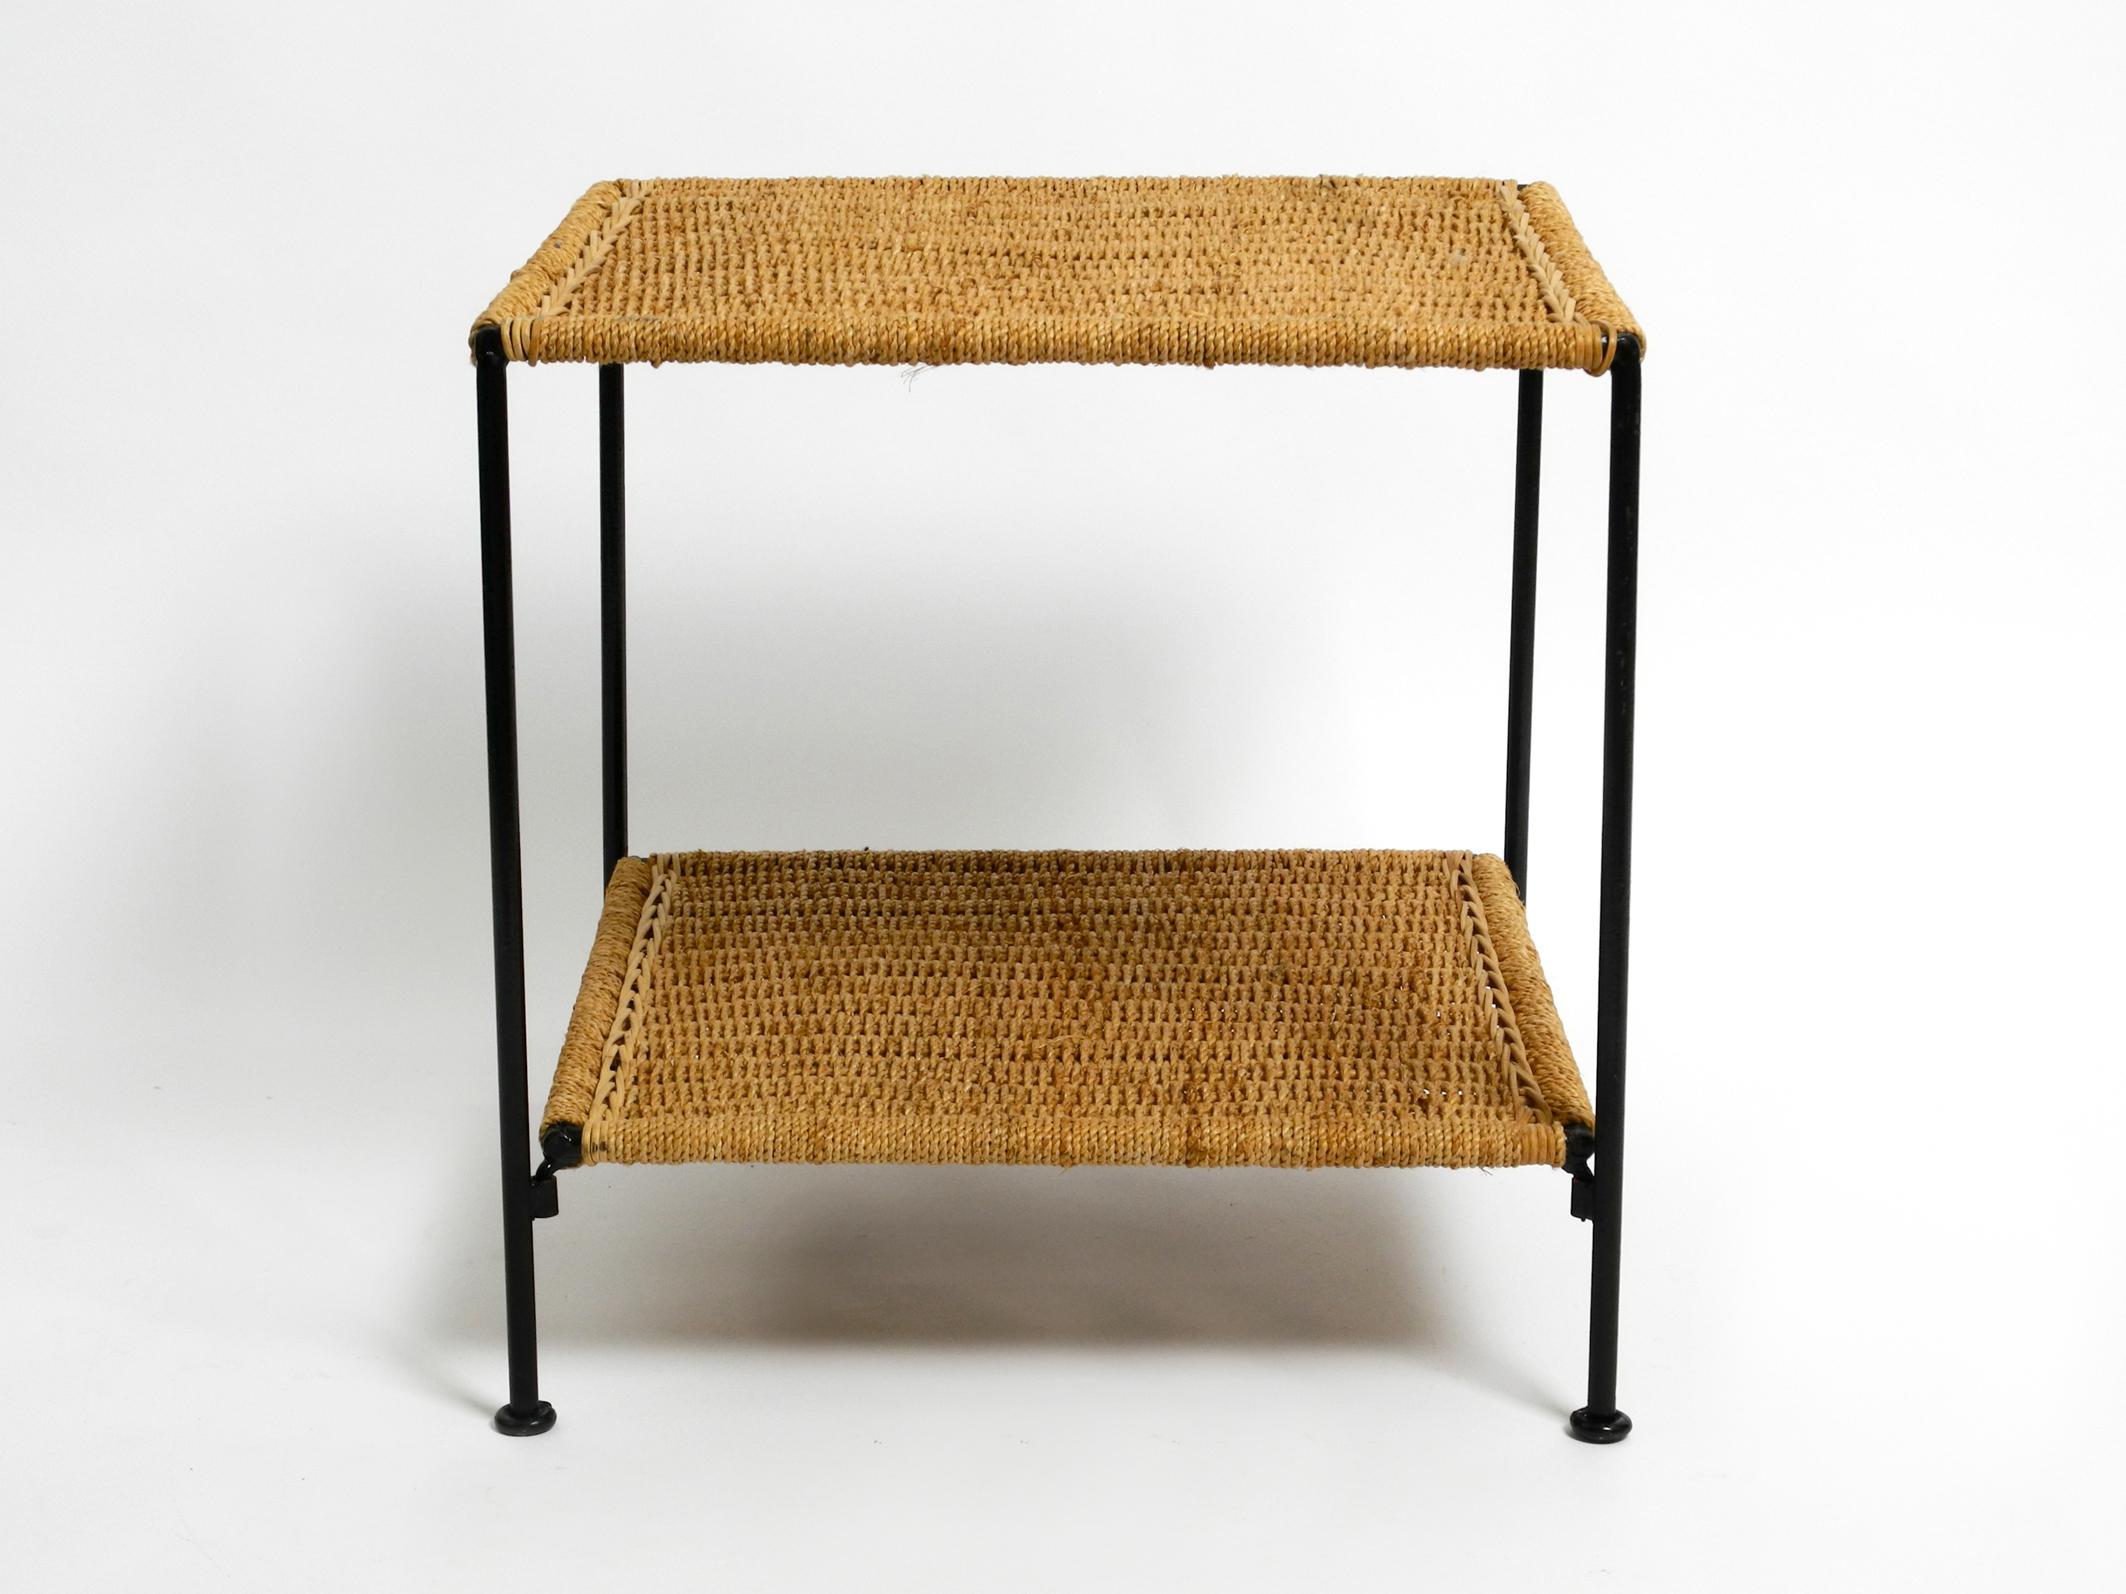 Beautiful 1960s square metal side table with a cord mesh surfaces.
Great minimalistic Italian design.
Frame made entirely of metal in high-gloss black lacquered.
Both shelves are braided with thick cords and with extra rattan braiding on two